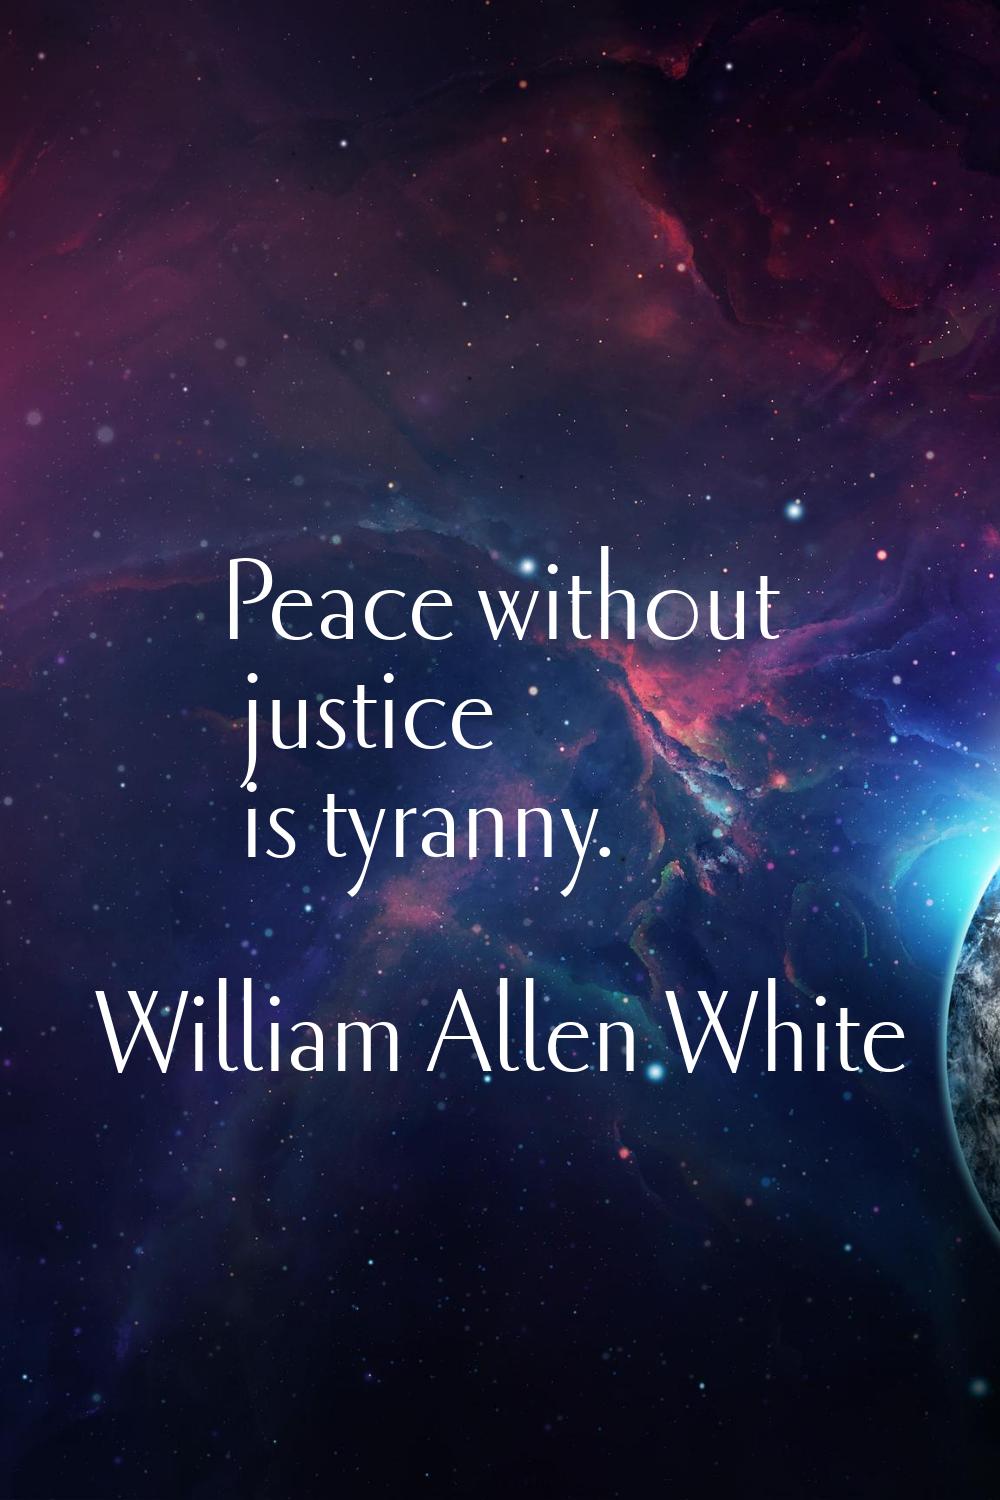 Peace without justice is tyranny.